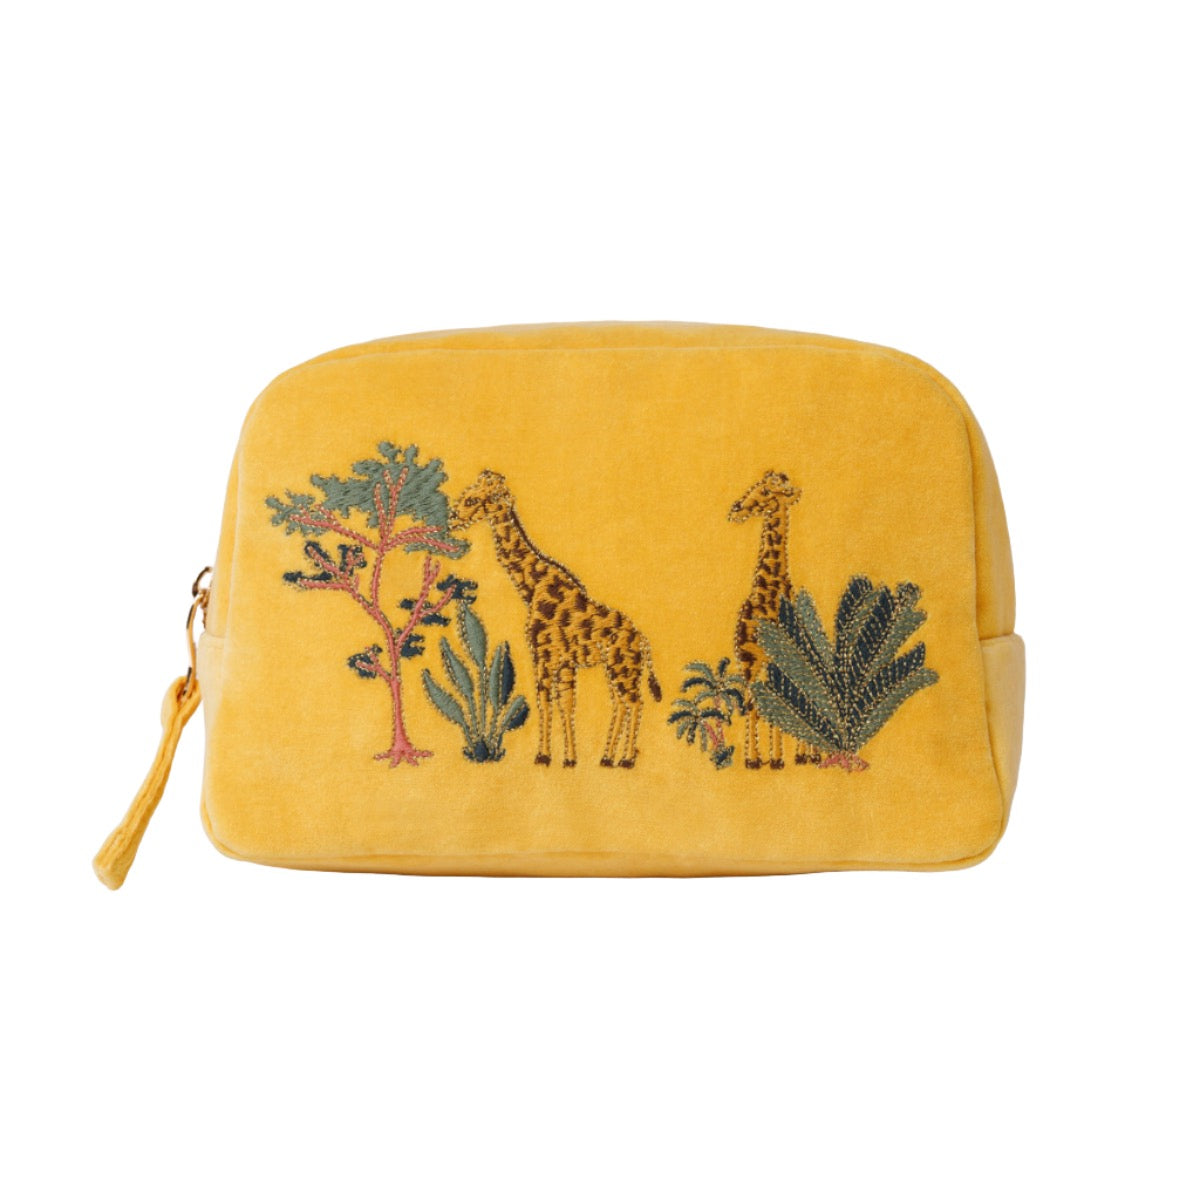 The Luxury Yellow Velvet Cosmetic Bag Embroidered with Giraffe Motif